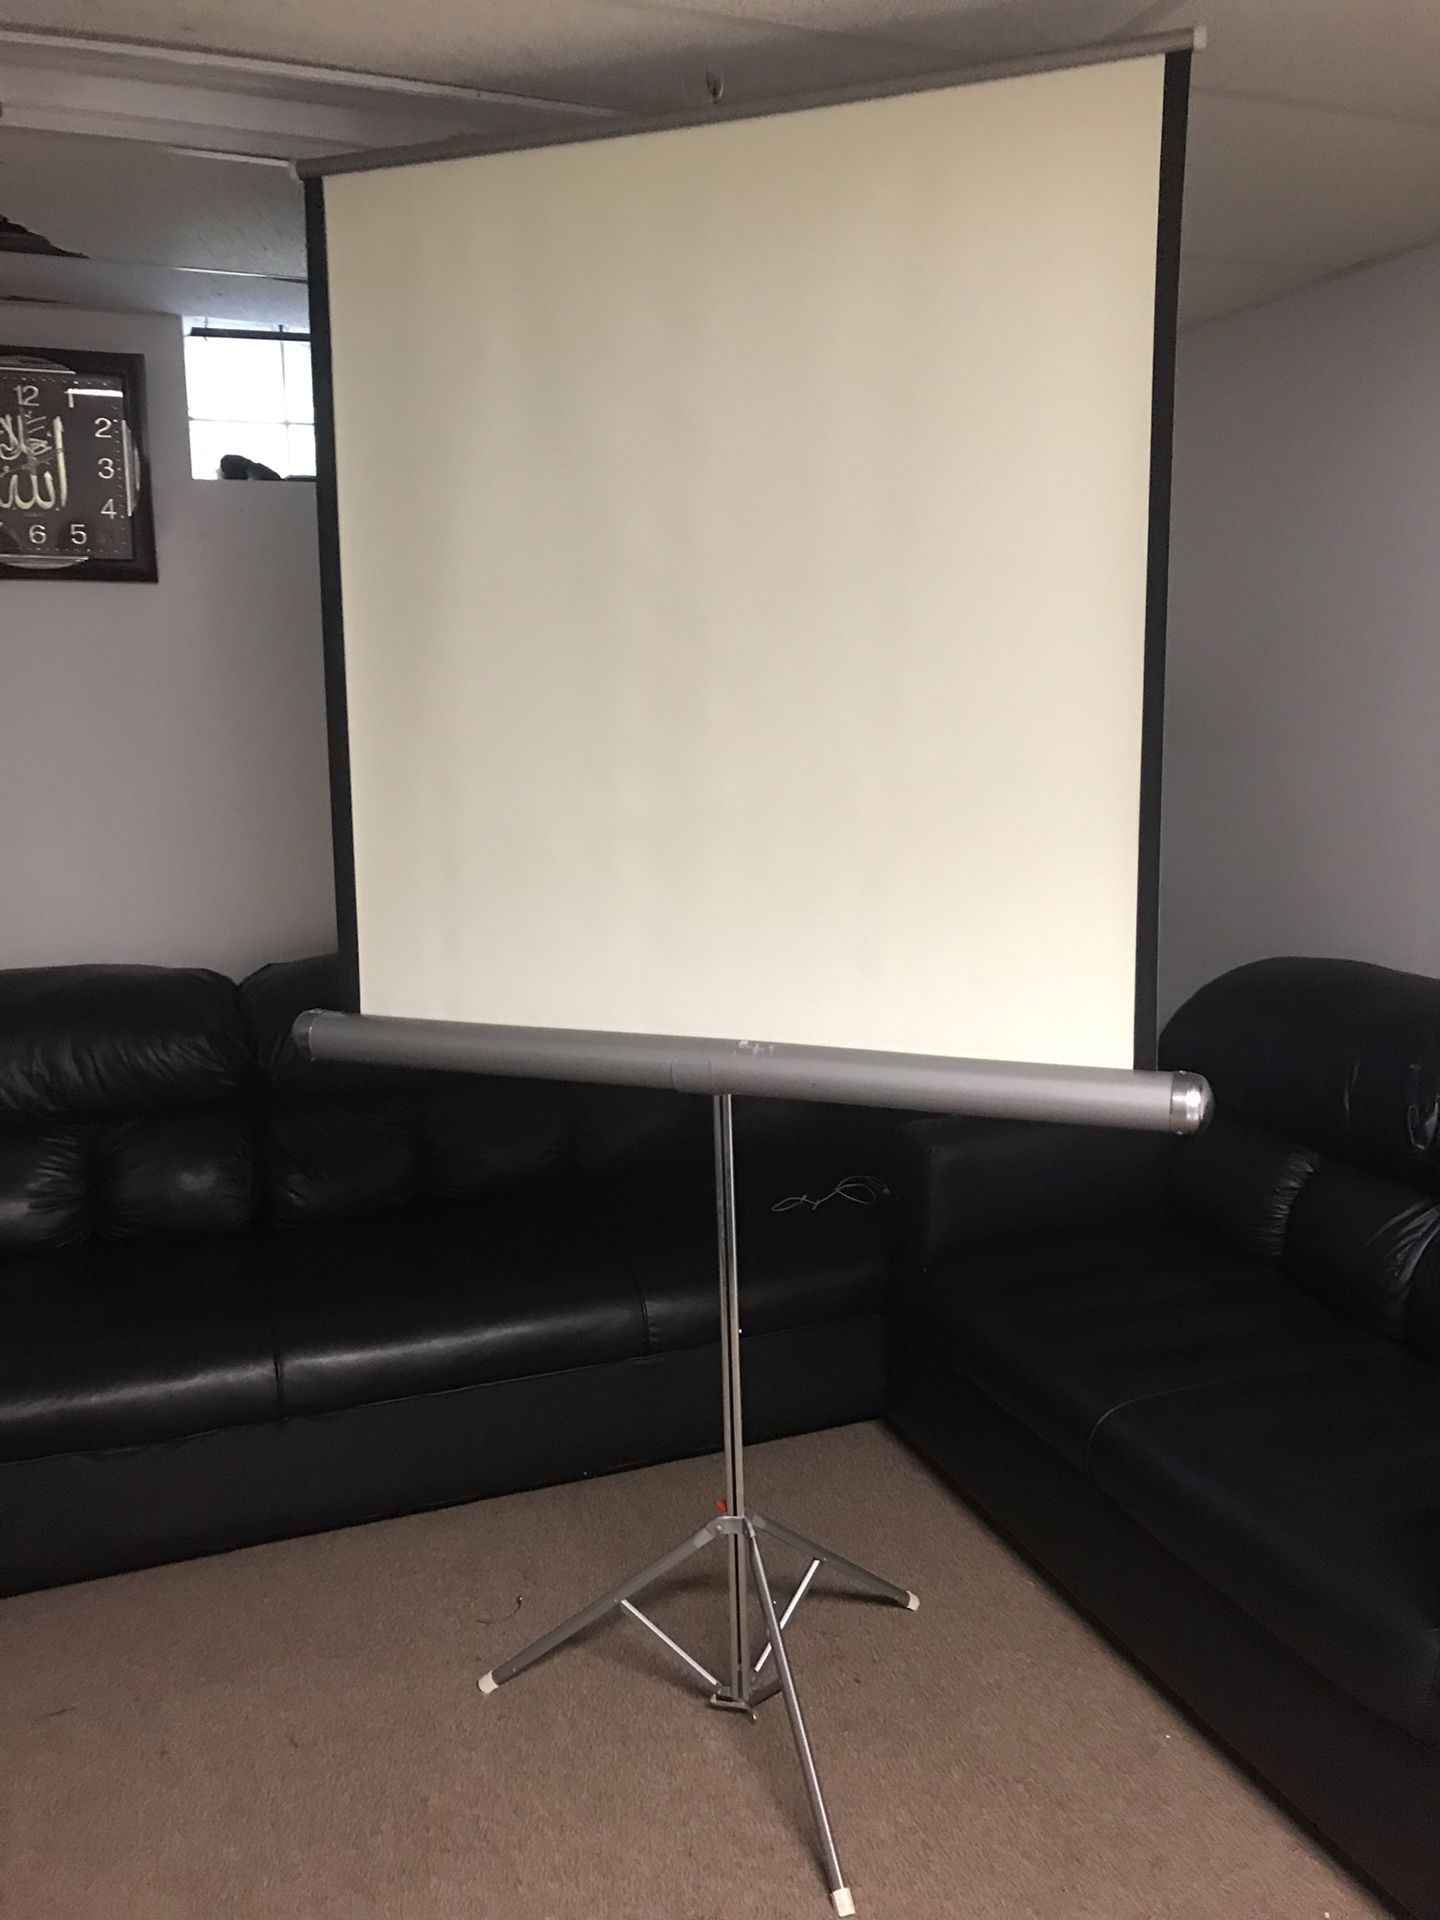 projector screen with stand